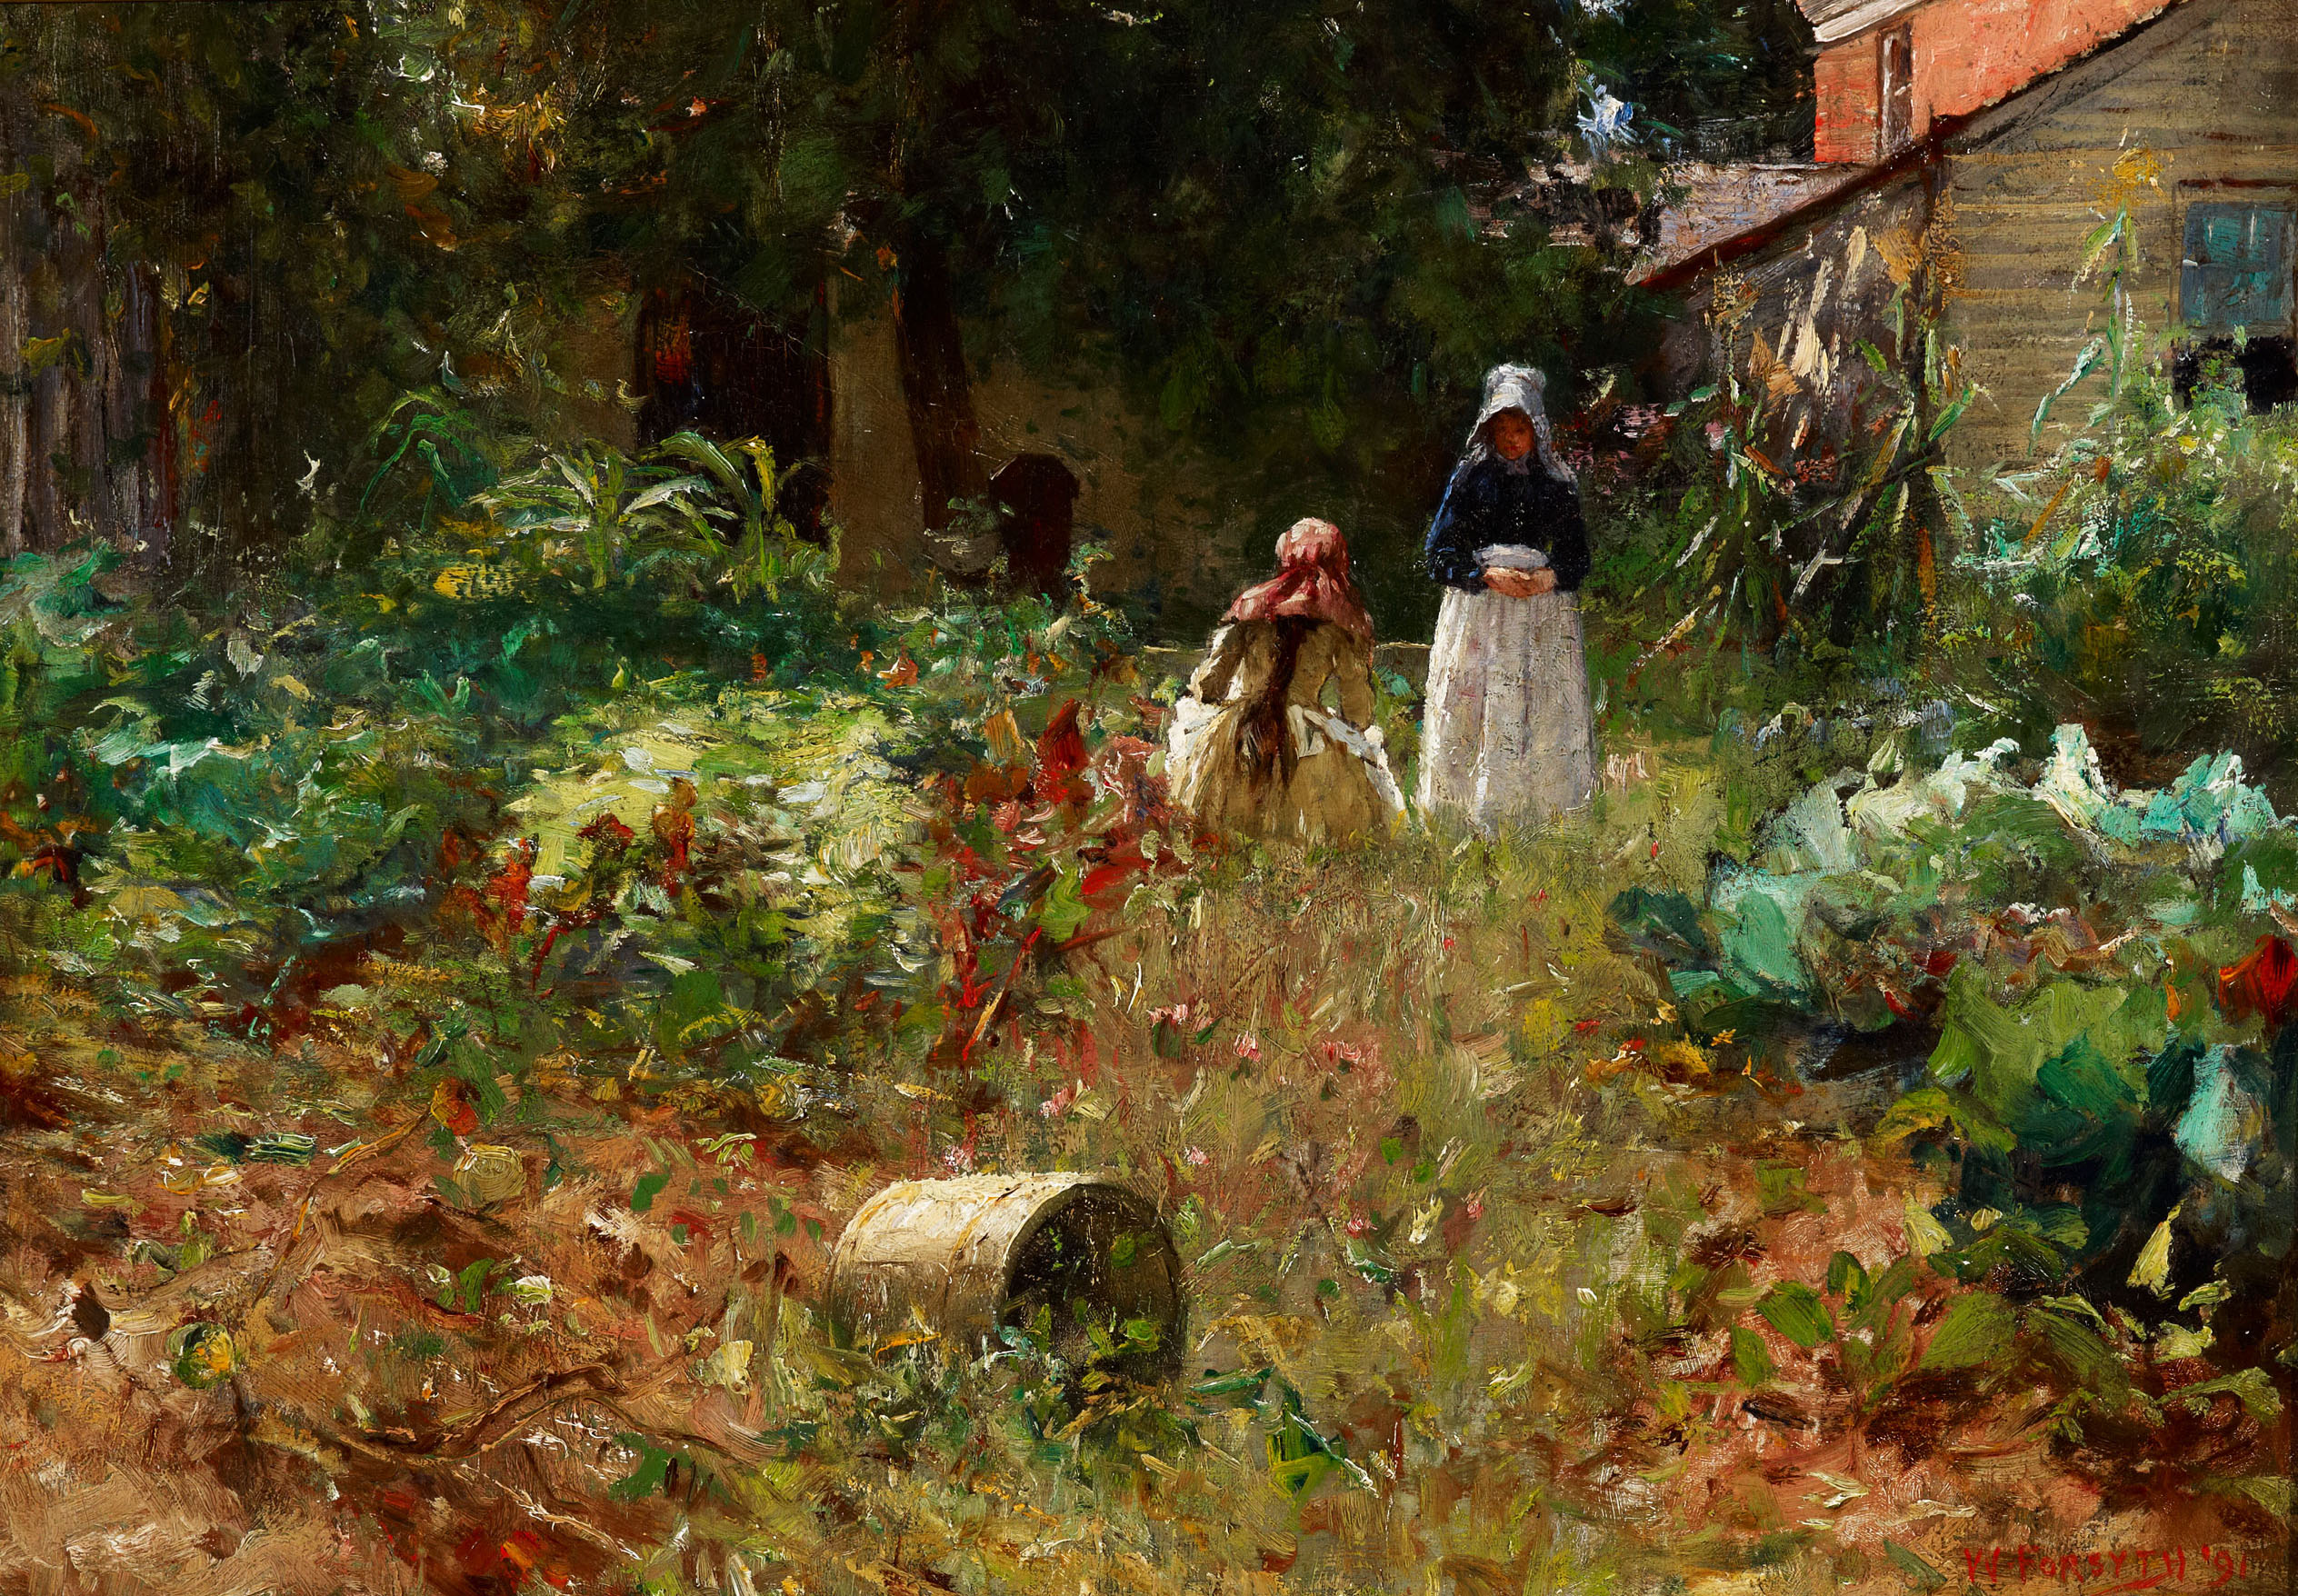 In the Garden,  William Forsyth, 1891. Courtesy of Indianapolis Museum of Art at Newfields.